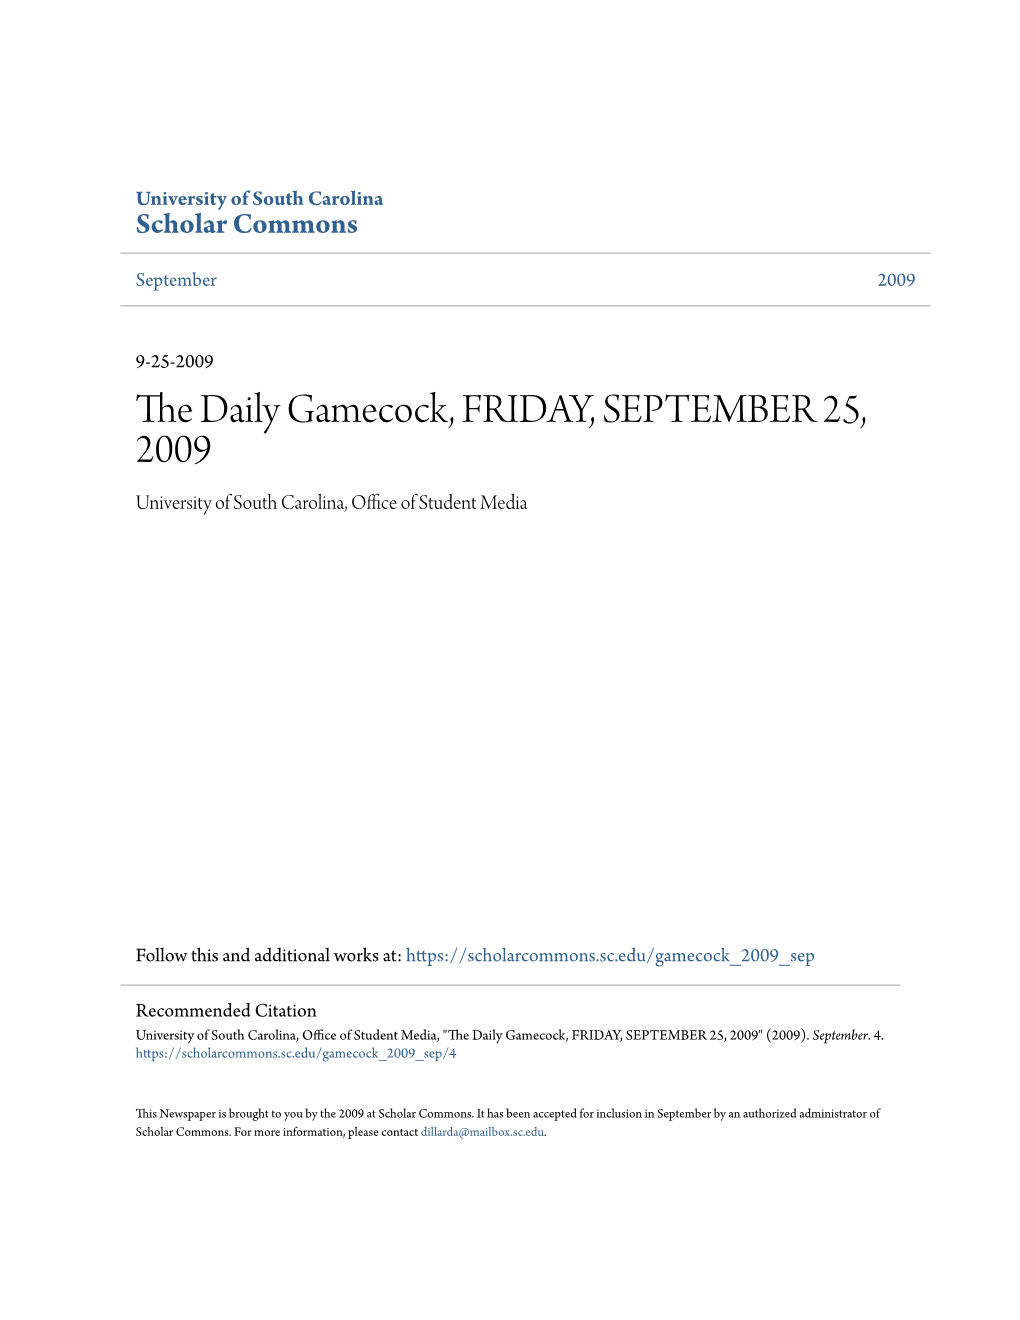 The Daily Gamecock, FRIDAY, SEPTEMBER 25, 2009